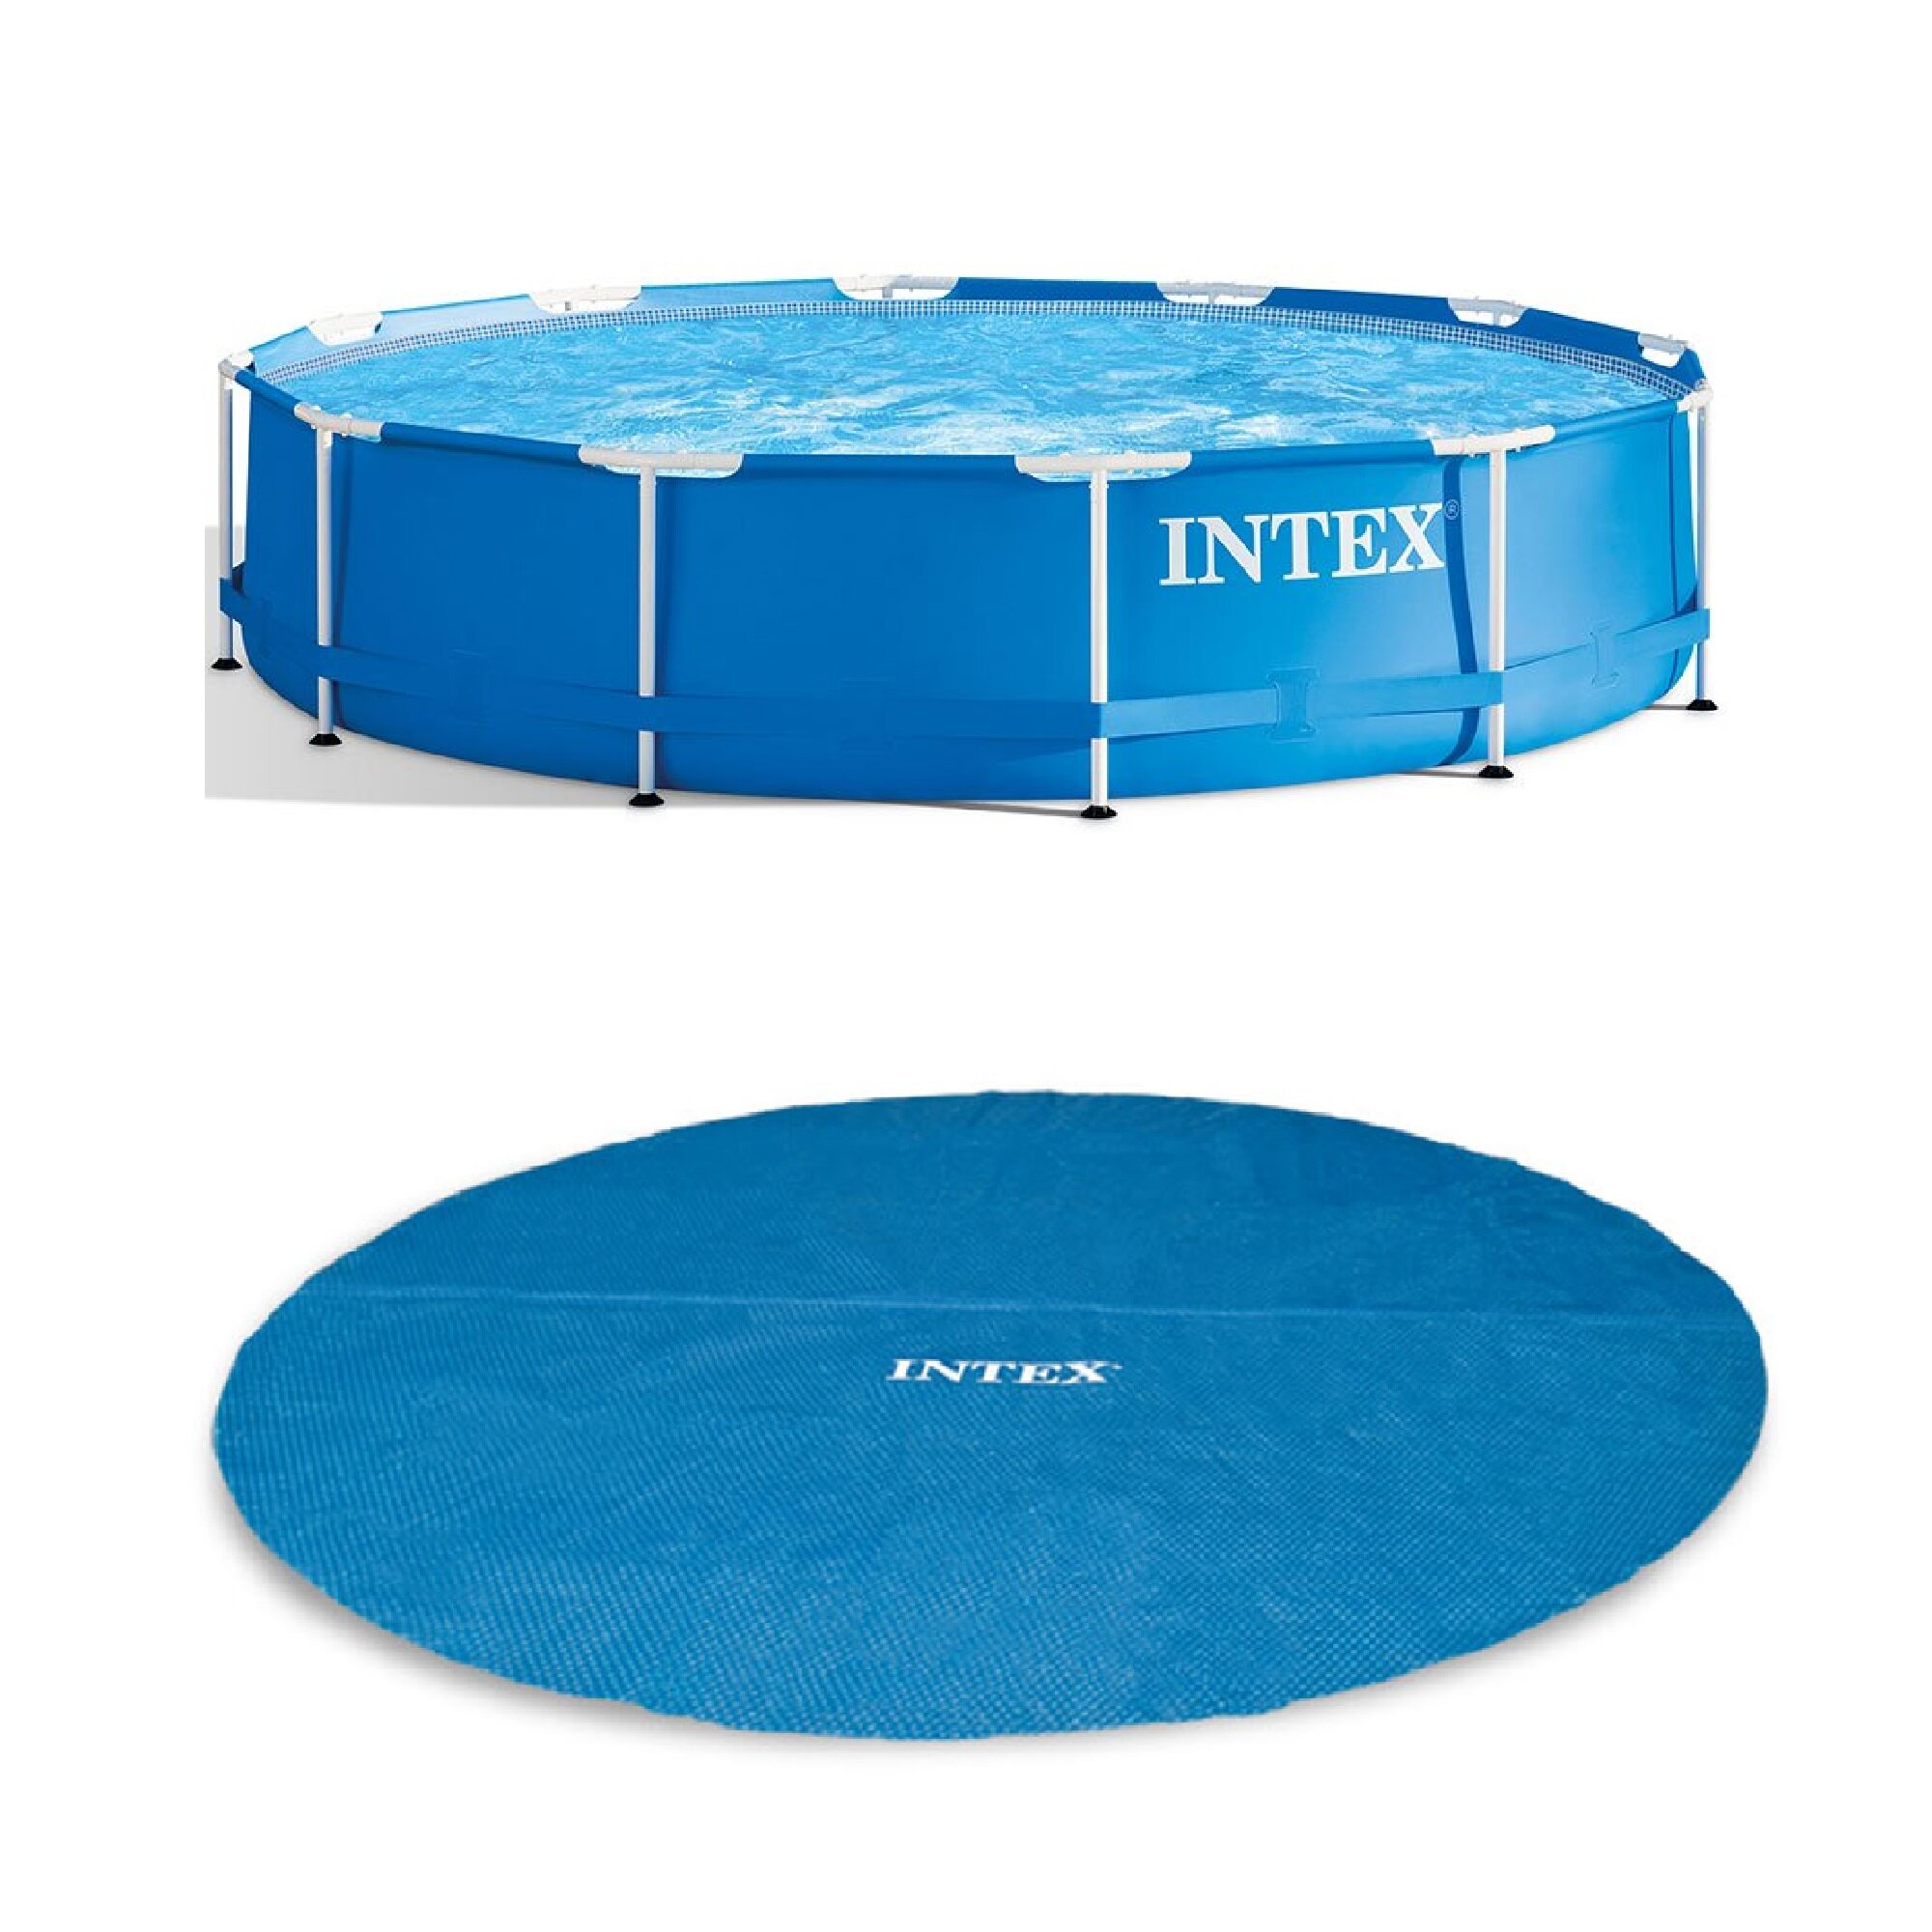 Intex 12 Foot x 30 In. Easy Set and Metal Frame w/ Solar Cover Blue | Wayfair